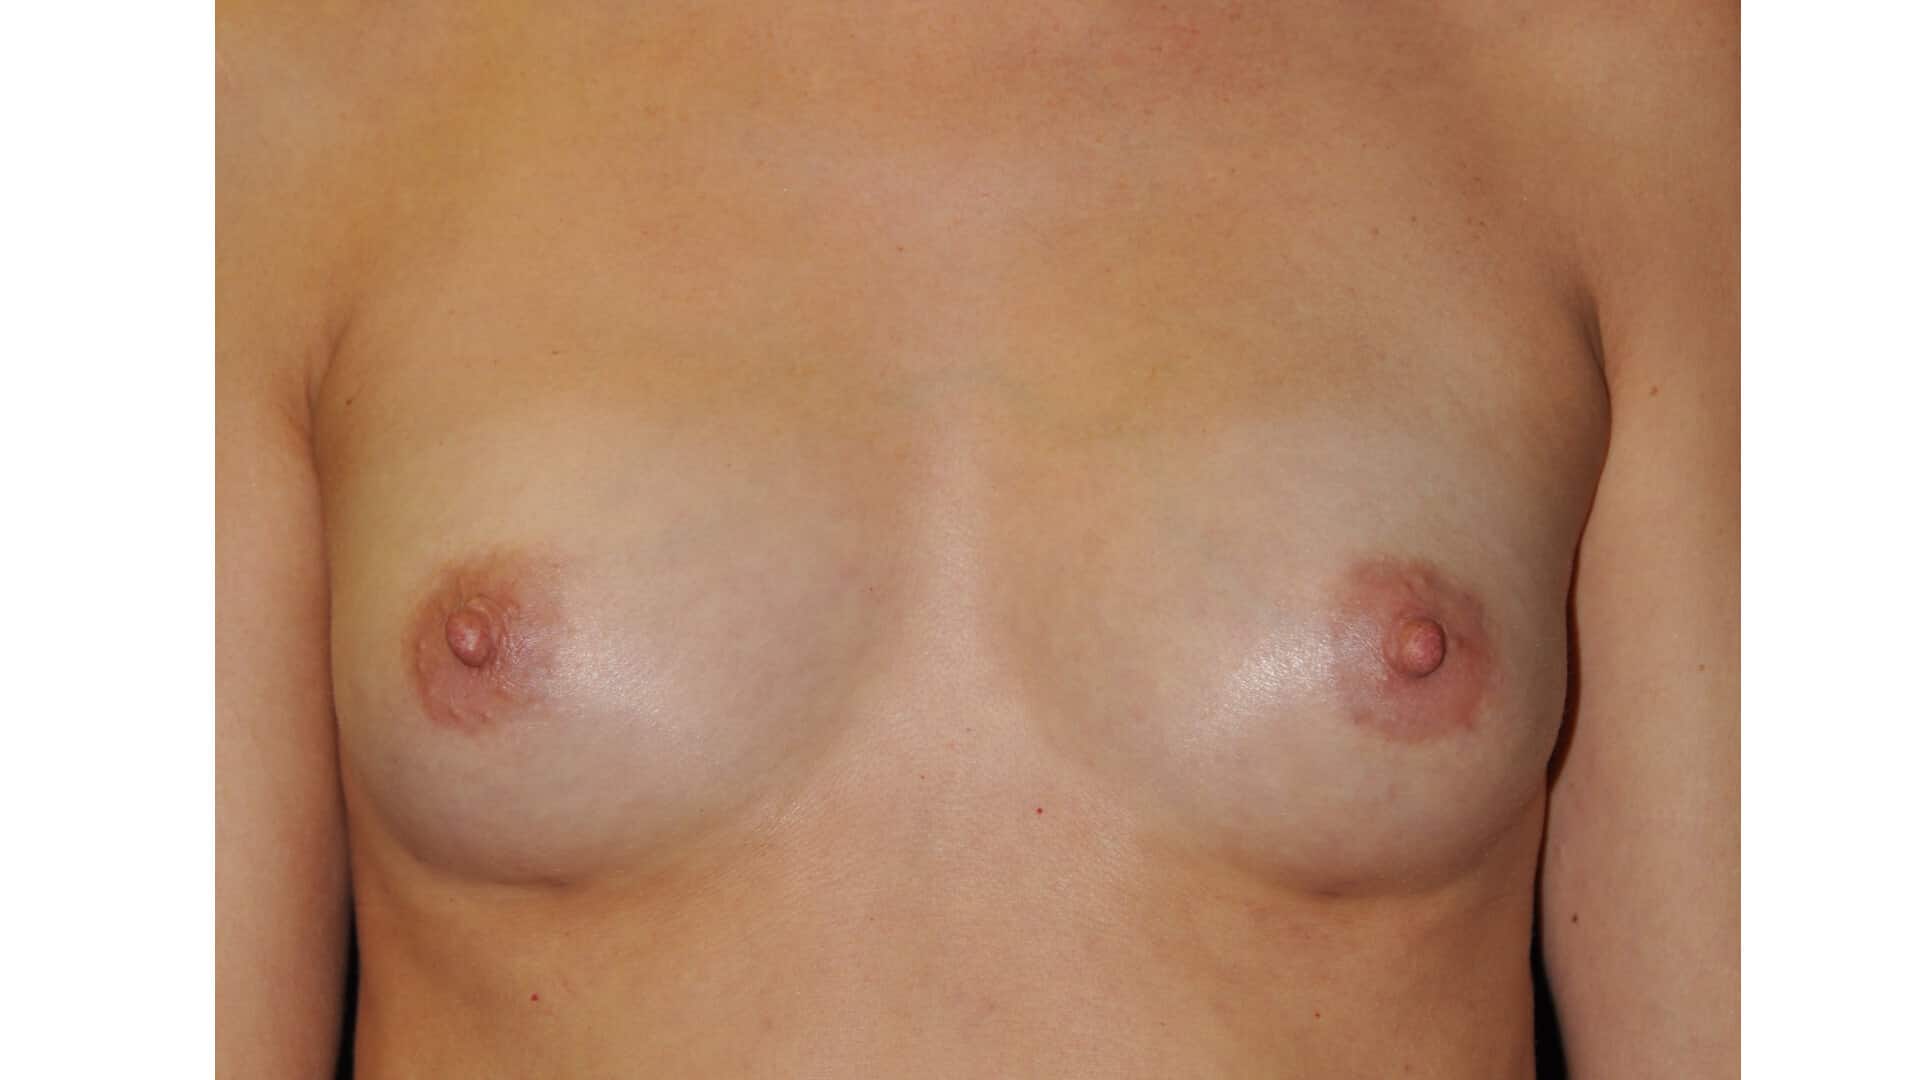 Fat Transfer Breast Augmentation Before and After,Fat Transfer Breast Augmentation Before and After Photos,Breast Fat Transfer Before & After Pictures,Fat Transfer to Breast Before and After Photos,Fat Transfer Breast Augmentation Before and After Pictures, Breast Augmentation &#8211; AFT